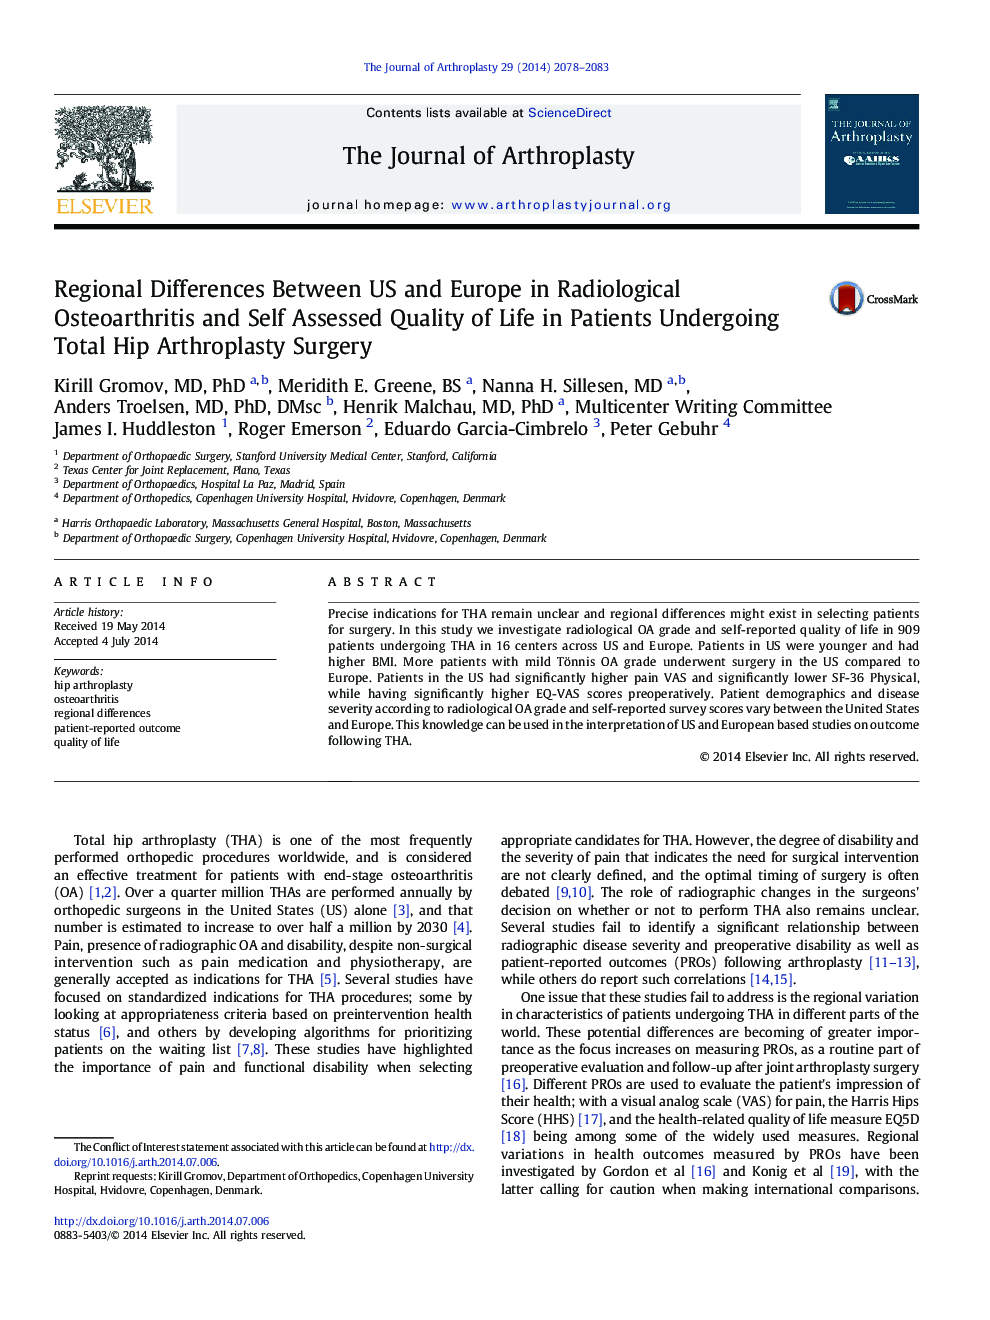 Regional Differences Between US and Europe in Radiological Osteoarthritis and Self Assessed Quality of Life in Patients Undergoing Total Hip Arthroplasty Surgery 